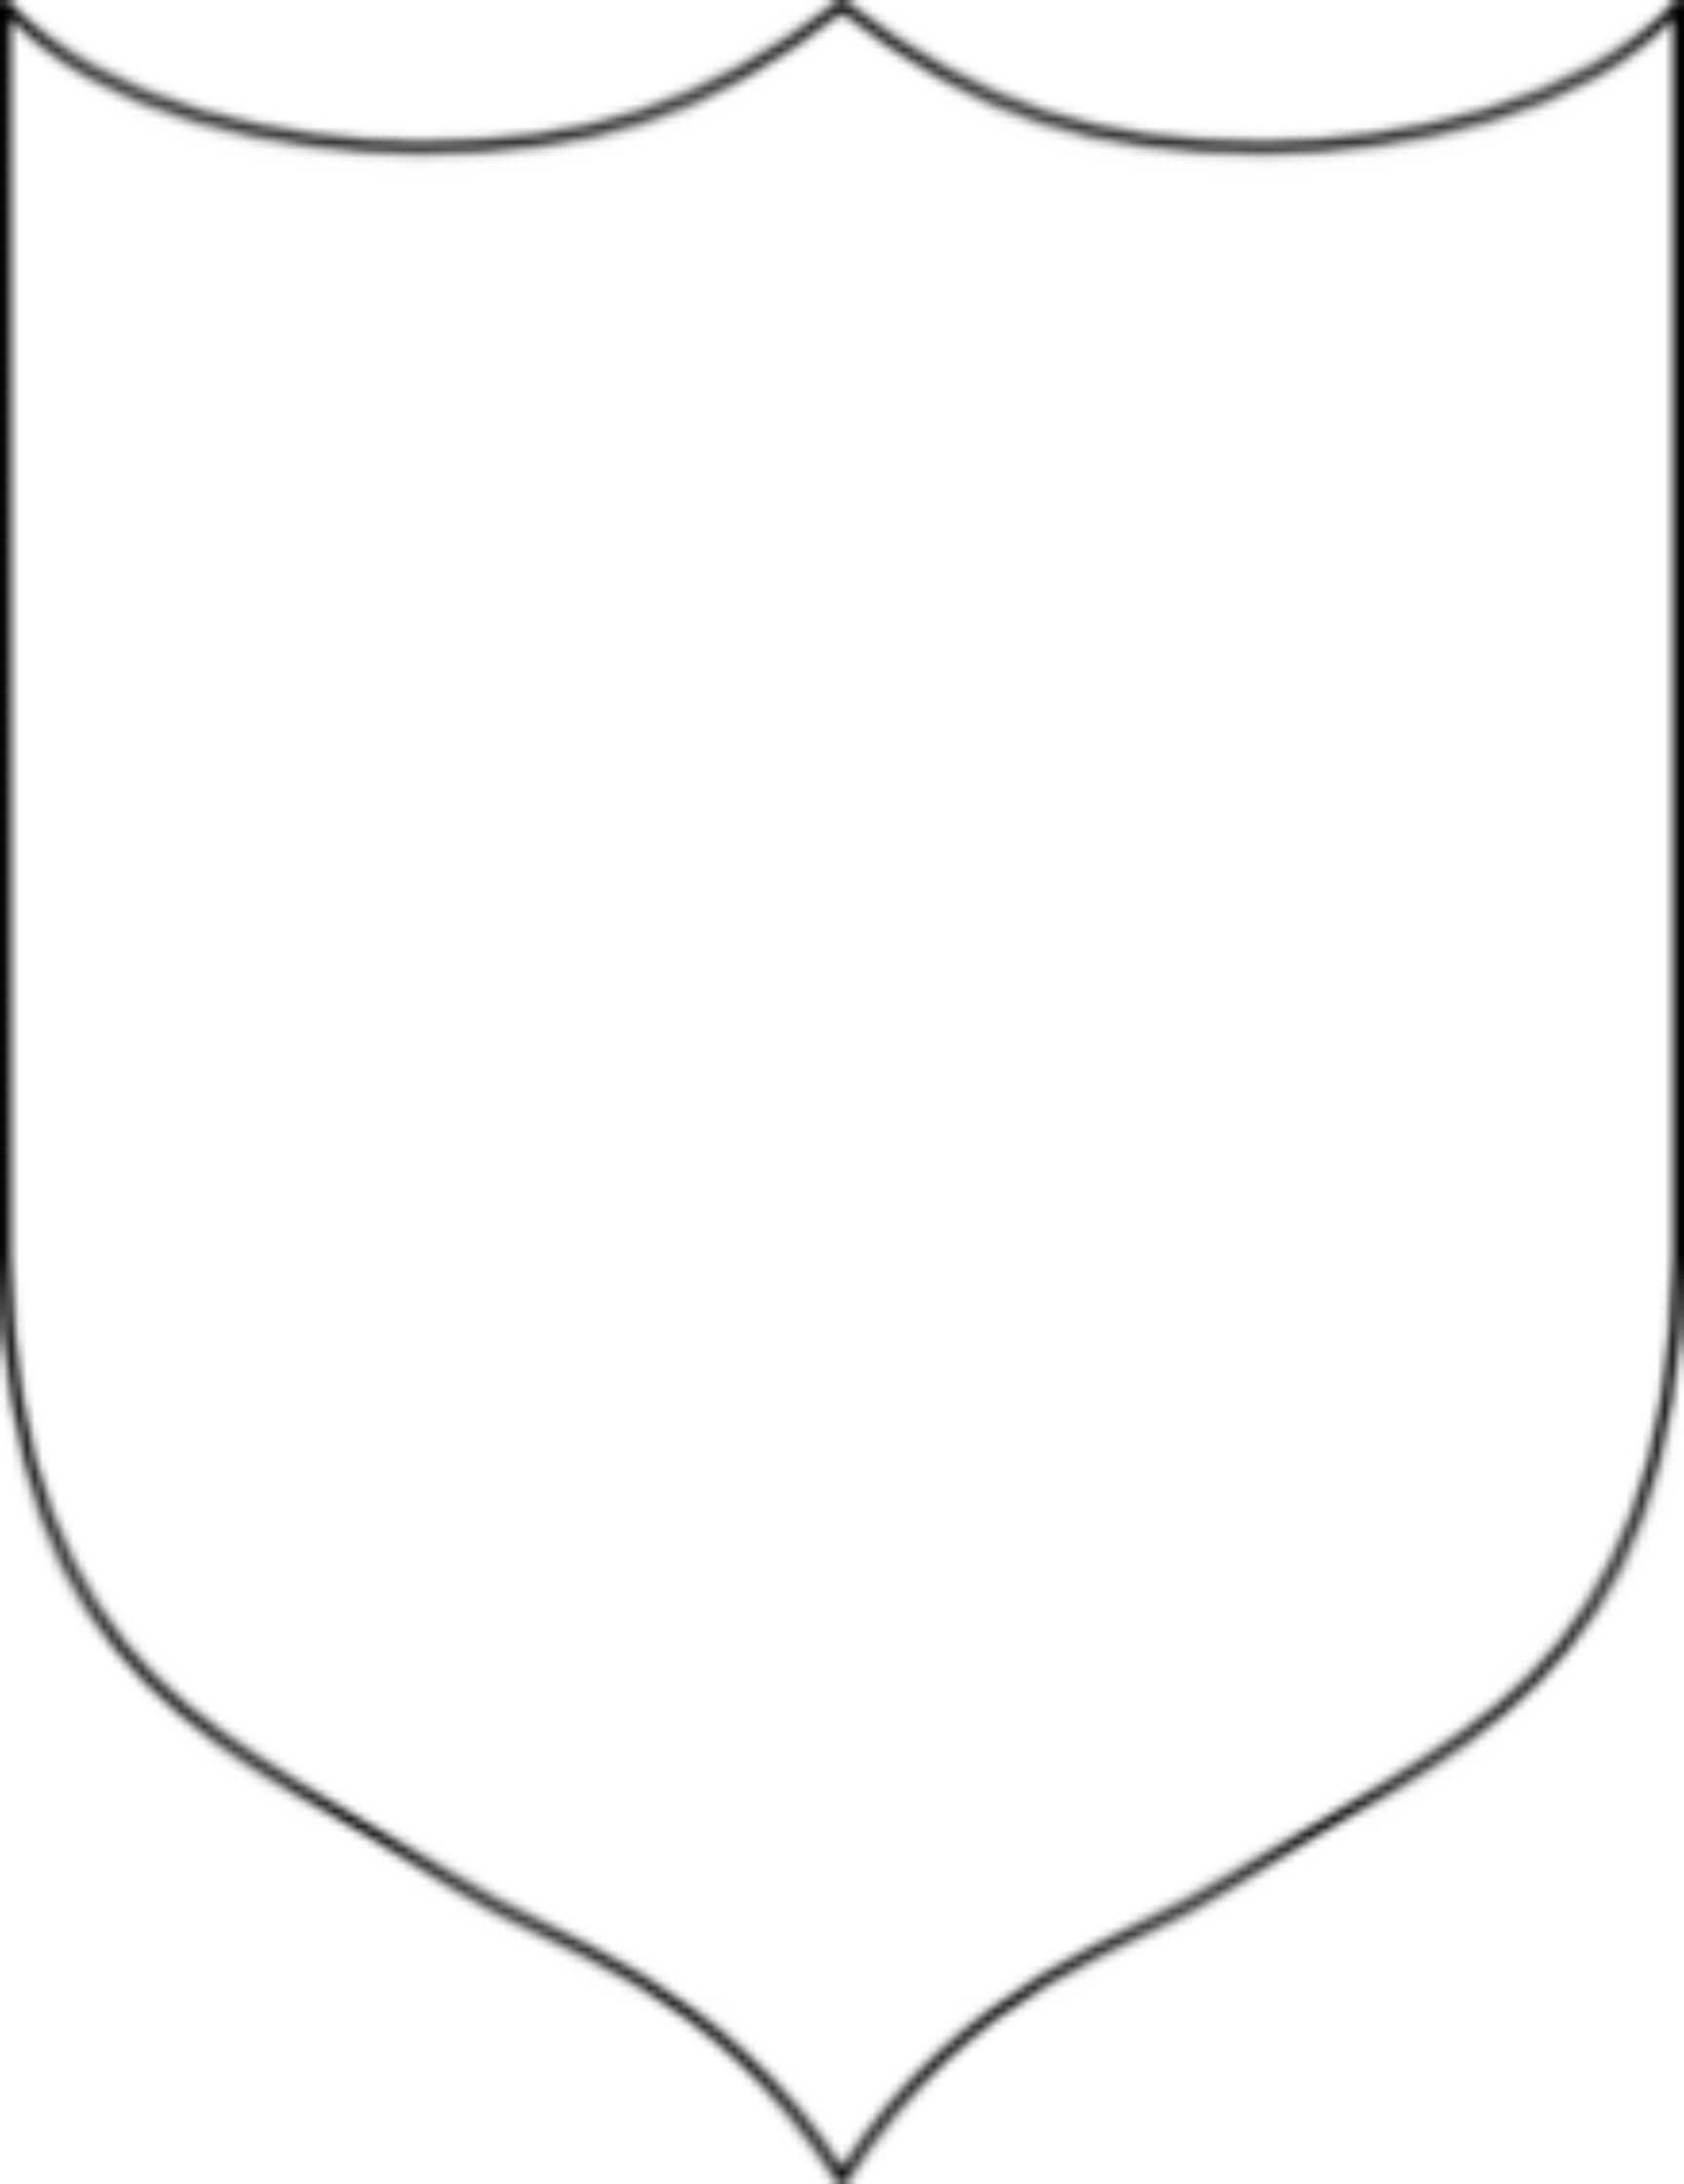 Blank Shield Md Free Images At Clker Com Vector Clip Art Online